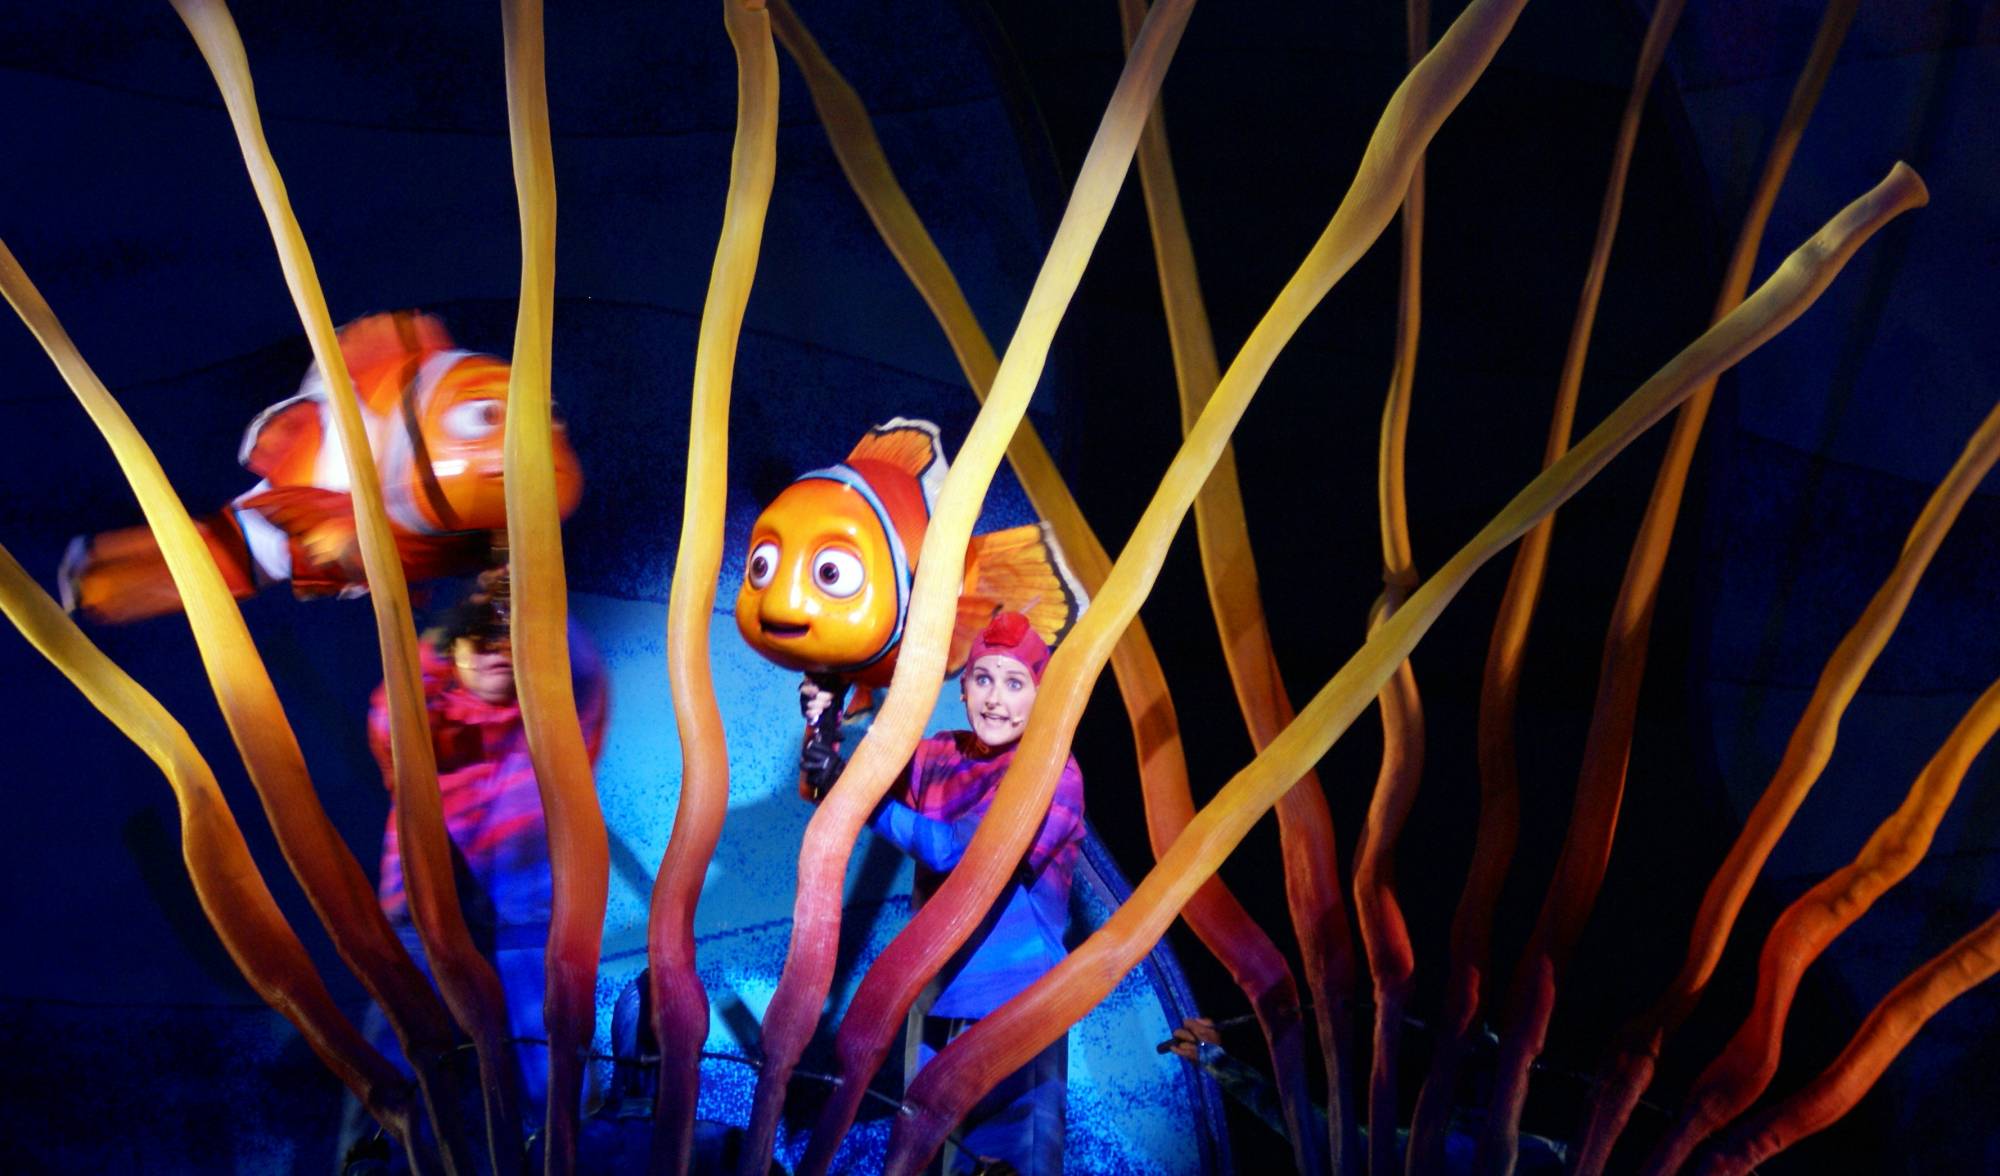 Finding Nemo: The Musical at Animal Kingdom